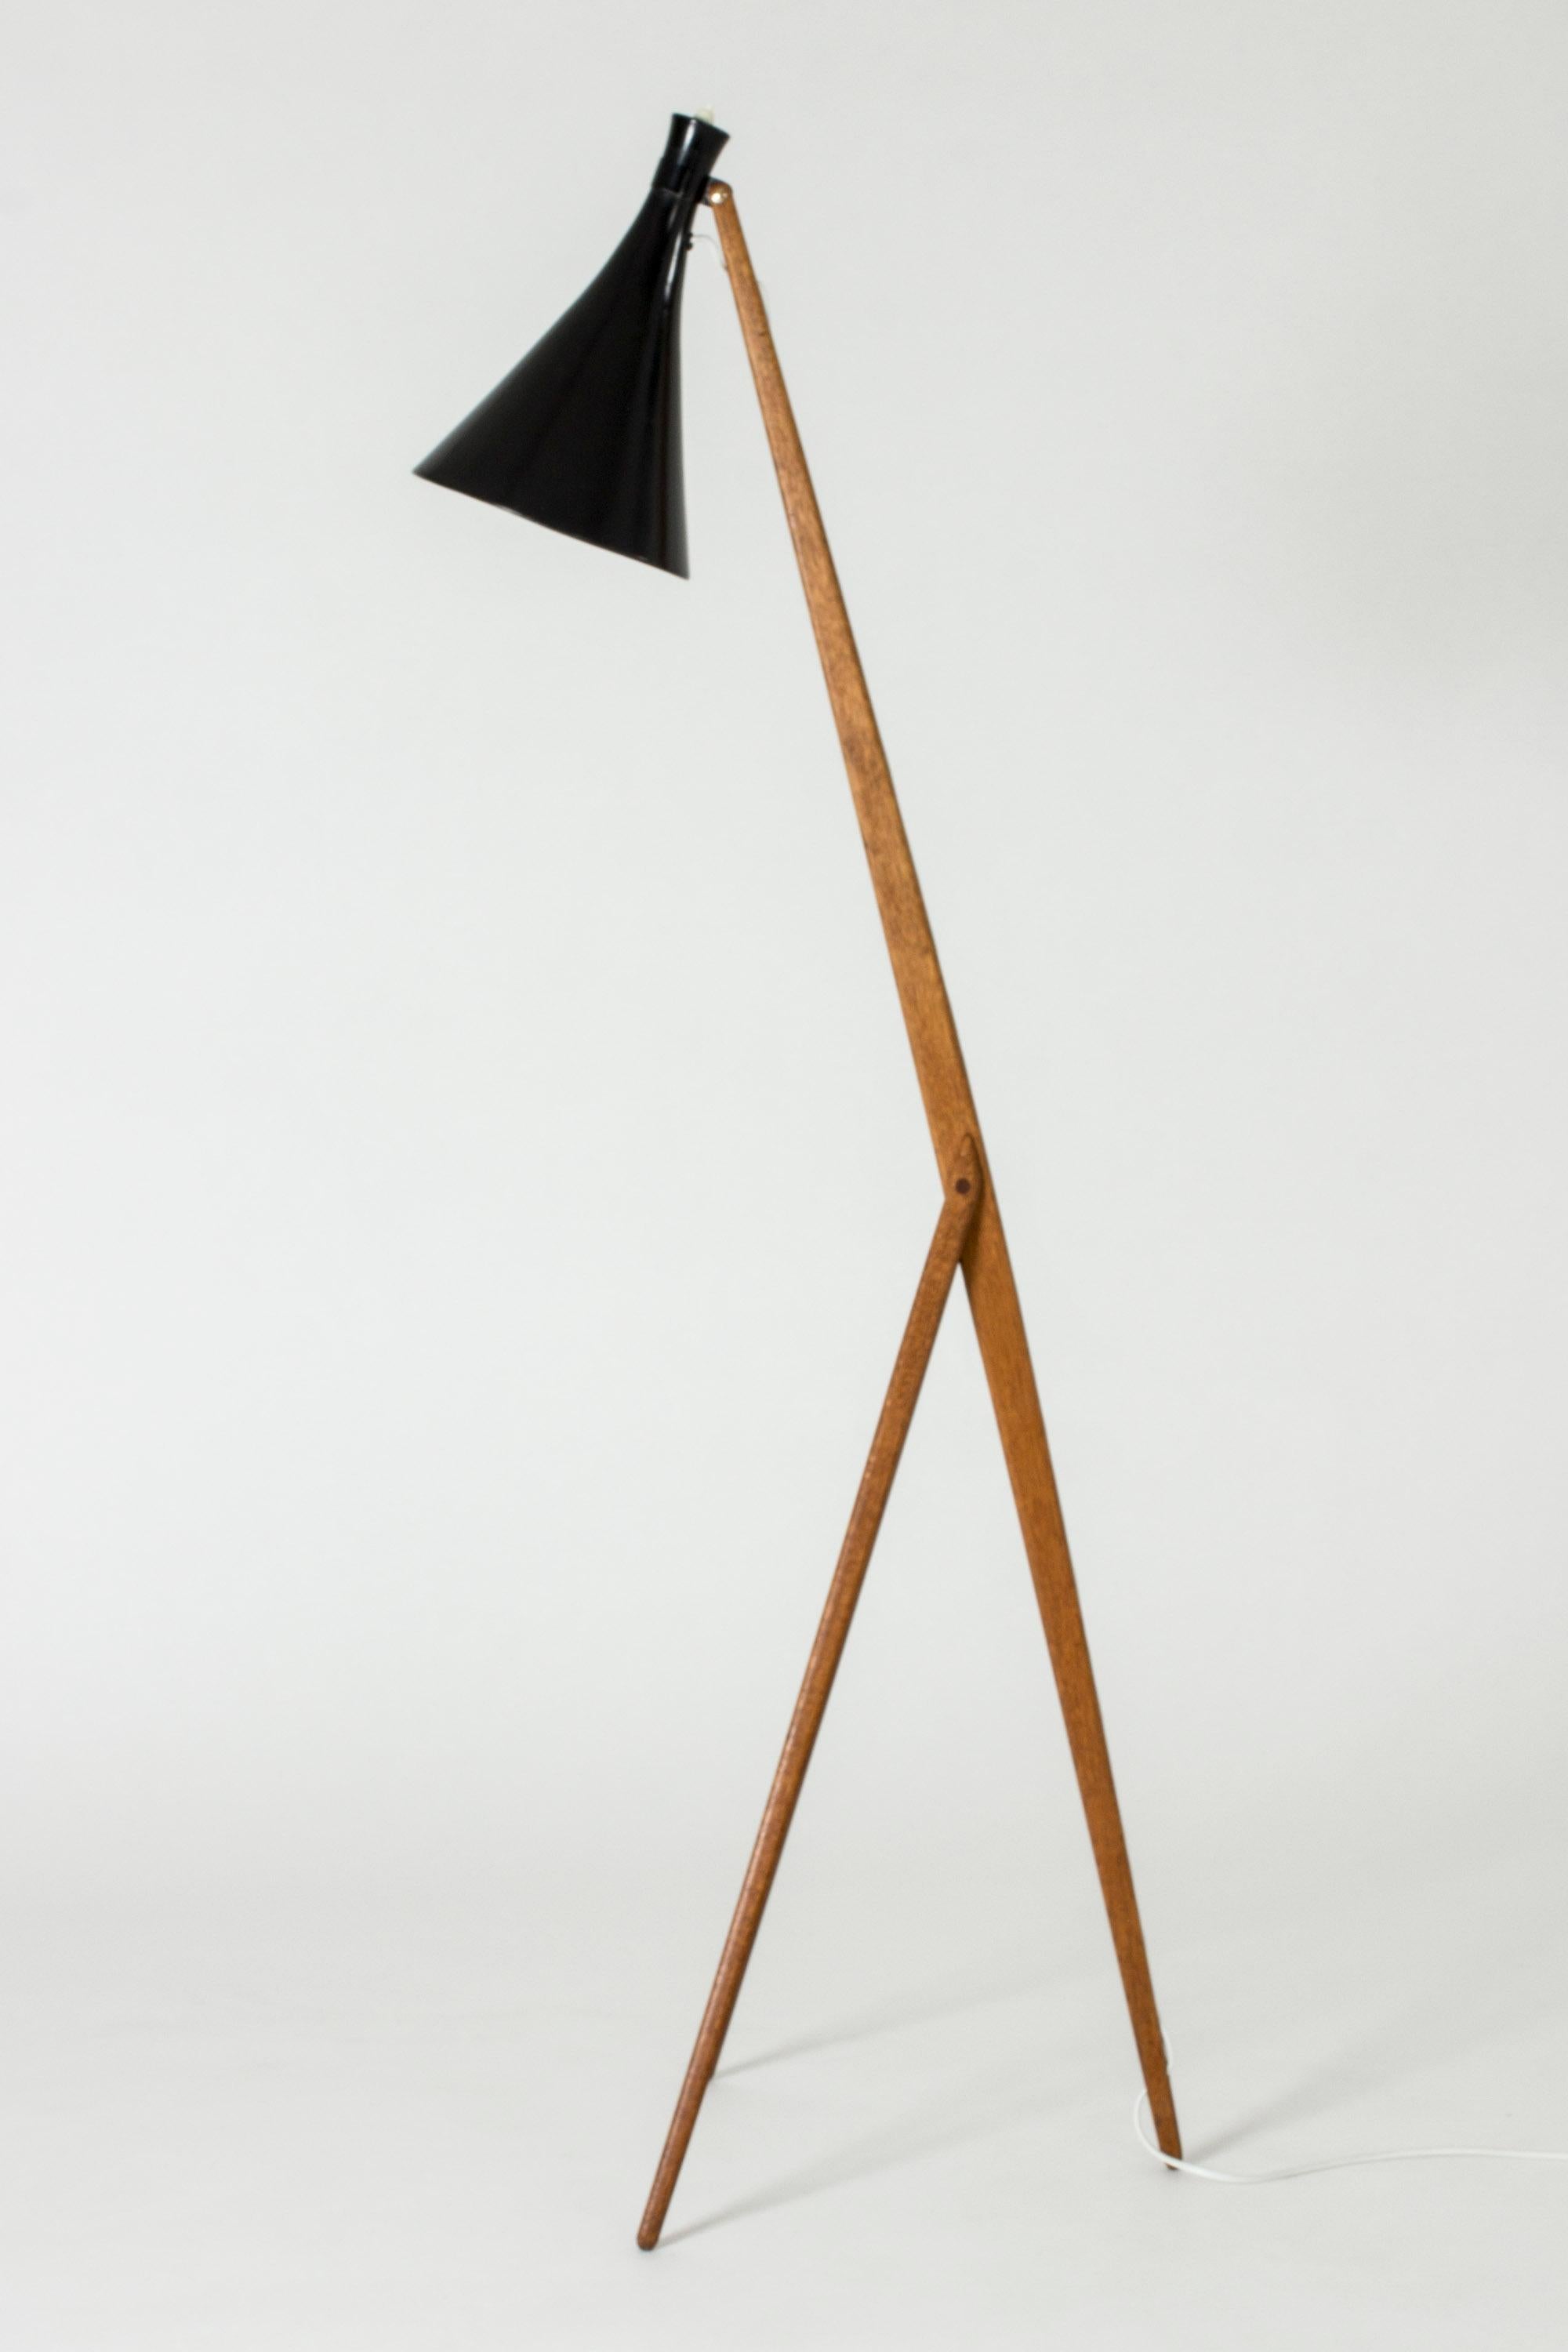 Amazing “Giraffe” floor lamp by Uno and Östen Kristiansson, made from solid teak with a black lacquered shade and brass details. The electrical cord is fitted into a slit running down the length of the back leg.